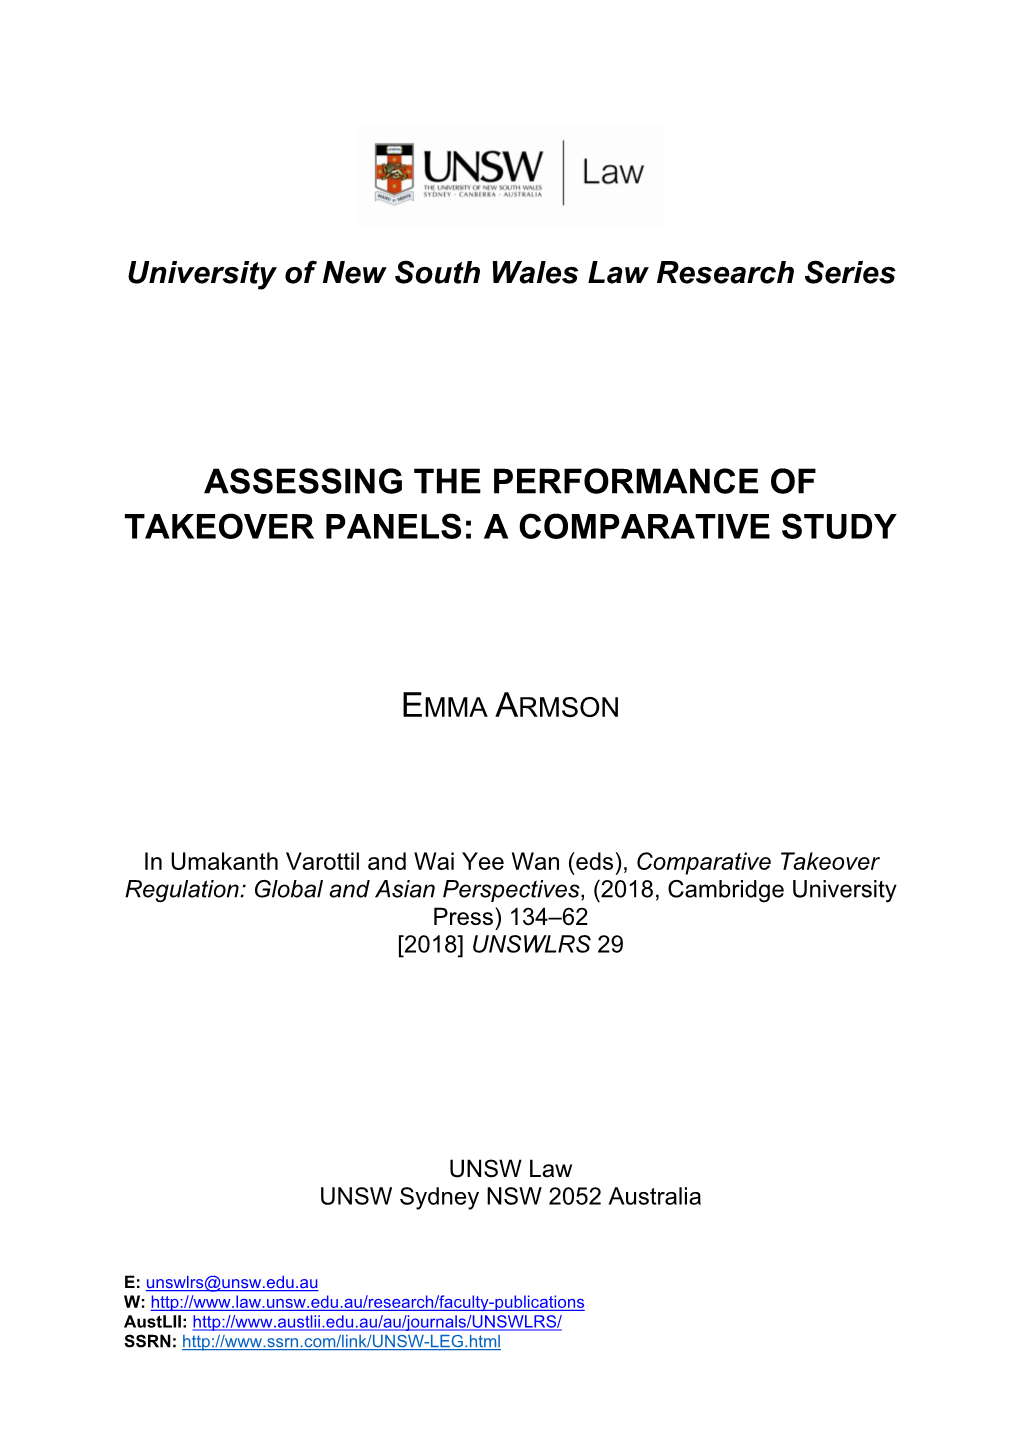 Assessing the Performance of Takeover Panels: a Comparative Study